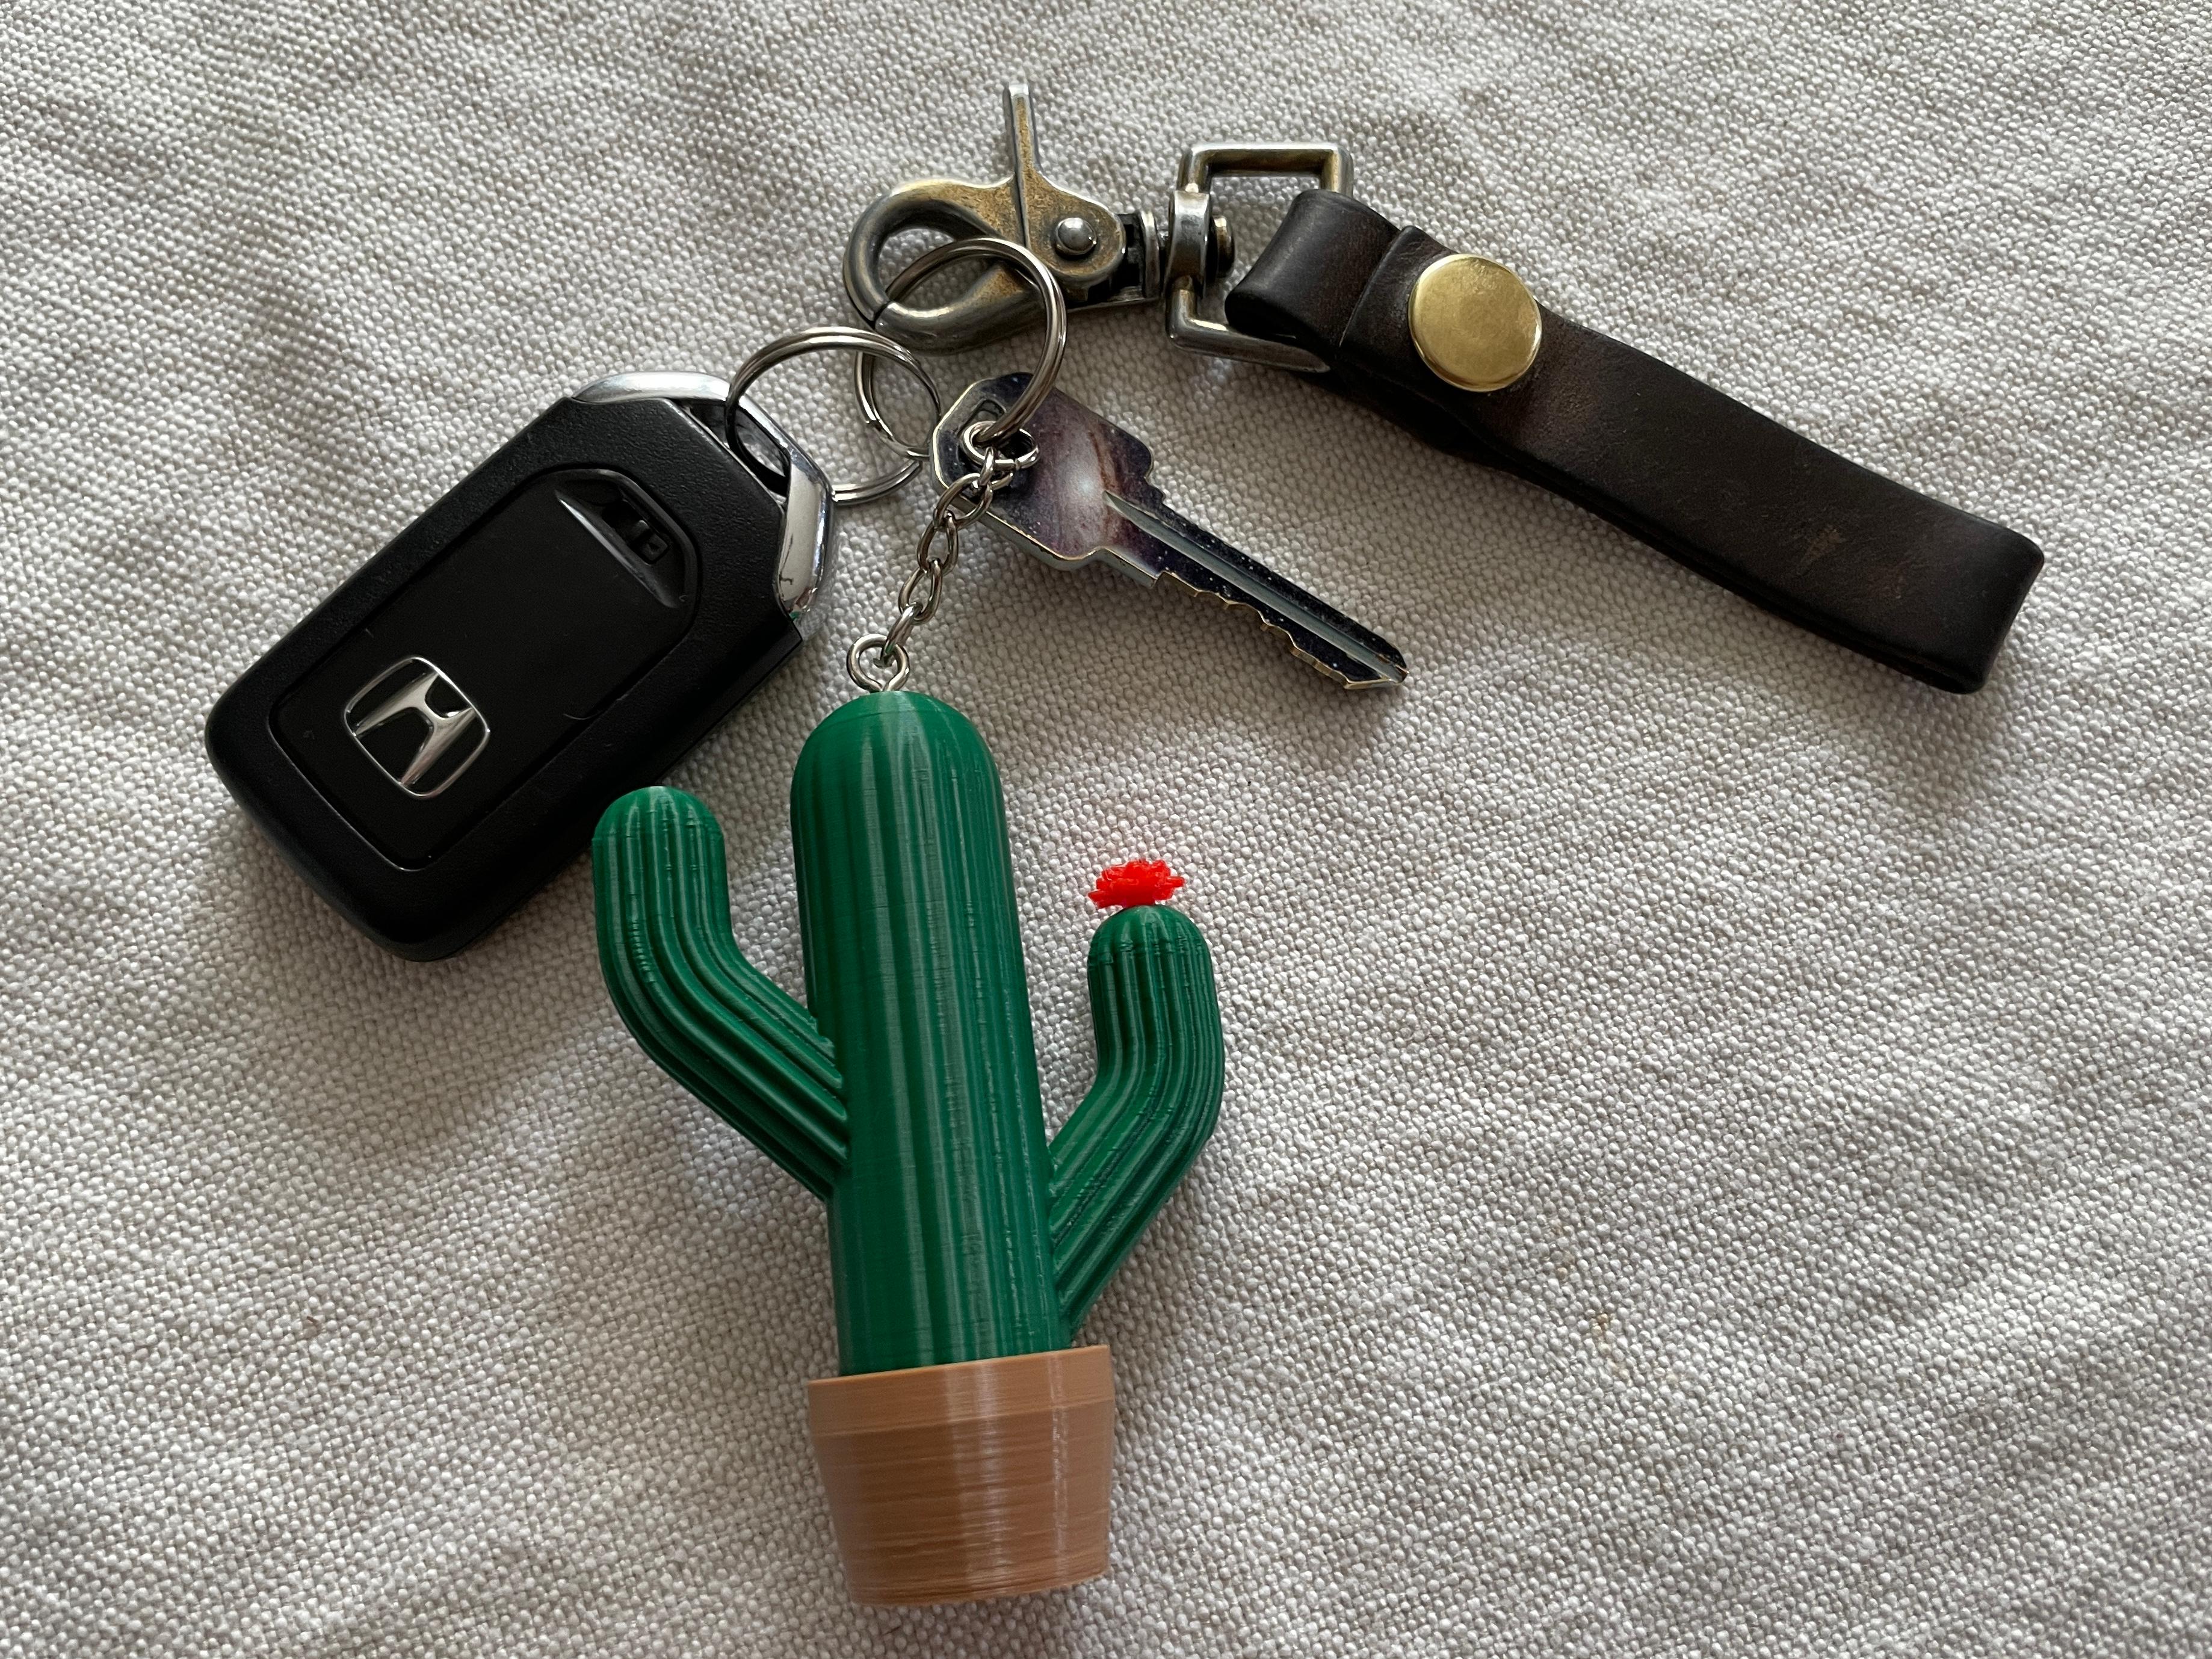 Cactus Canister Keychain 3d model